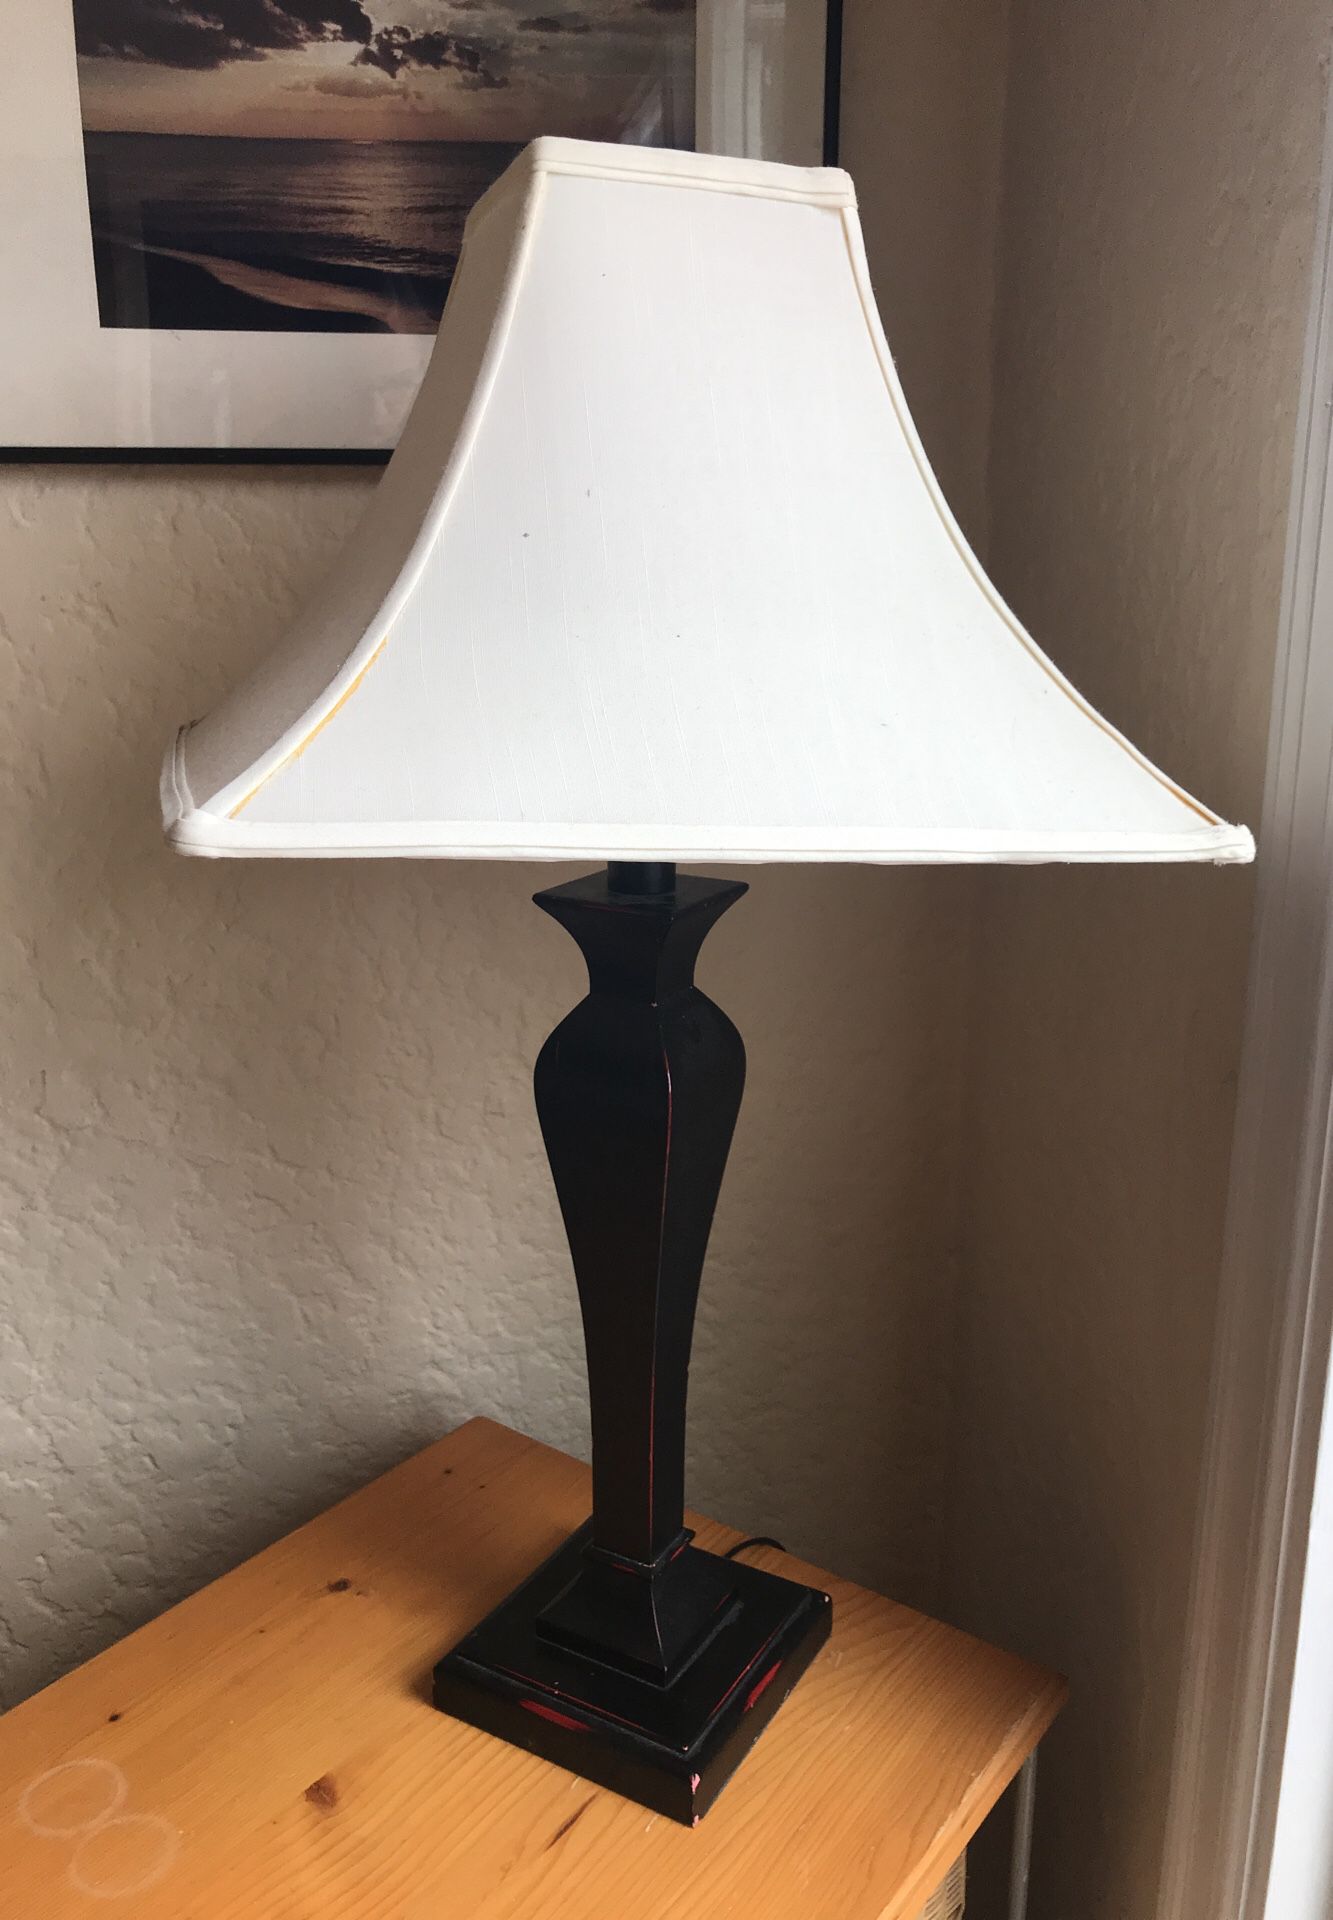 Table lamp in great condition